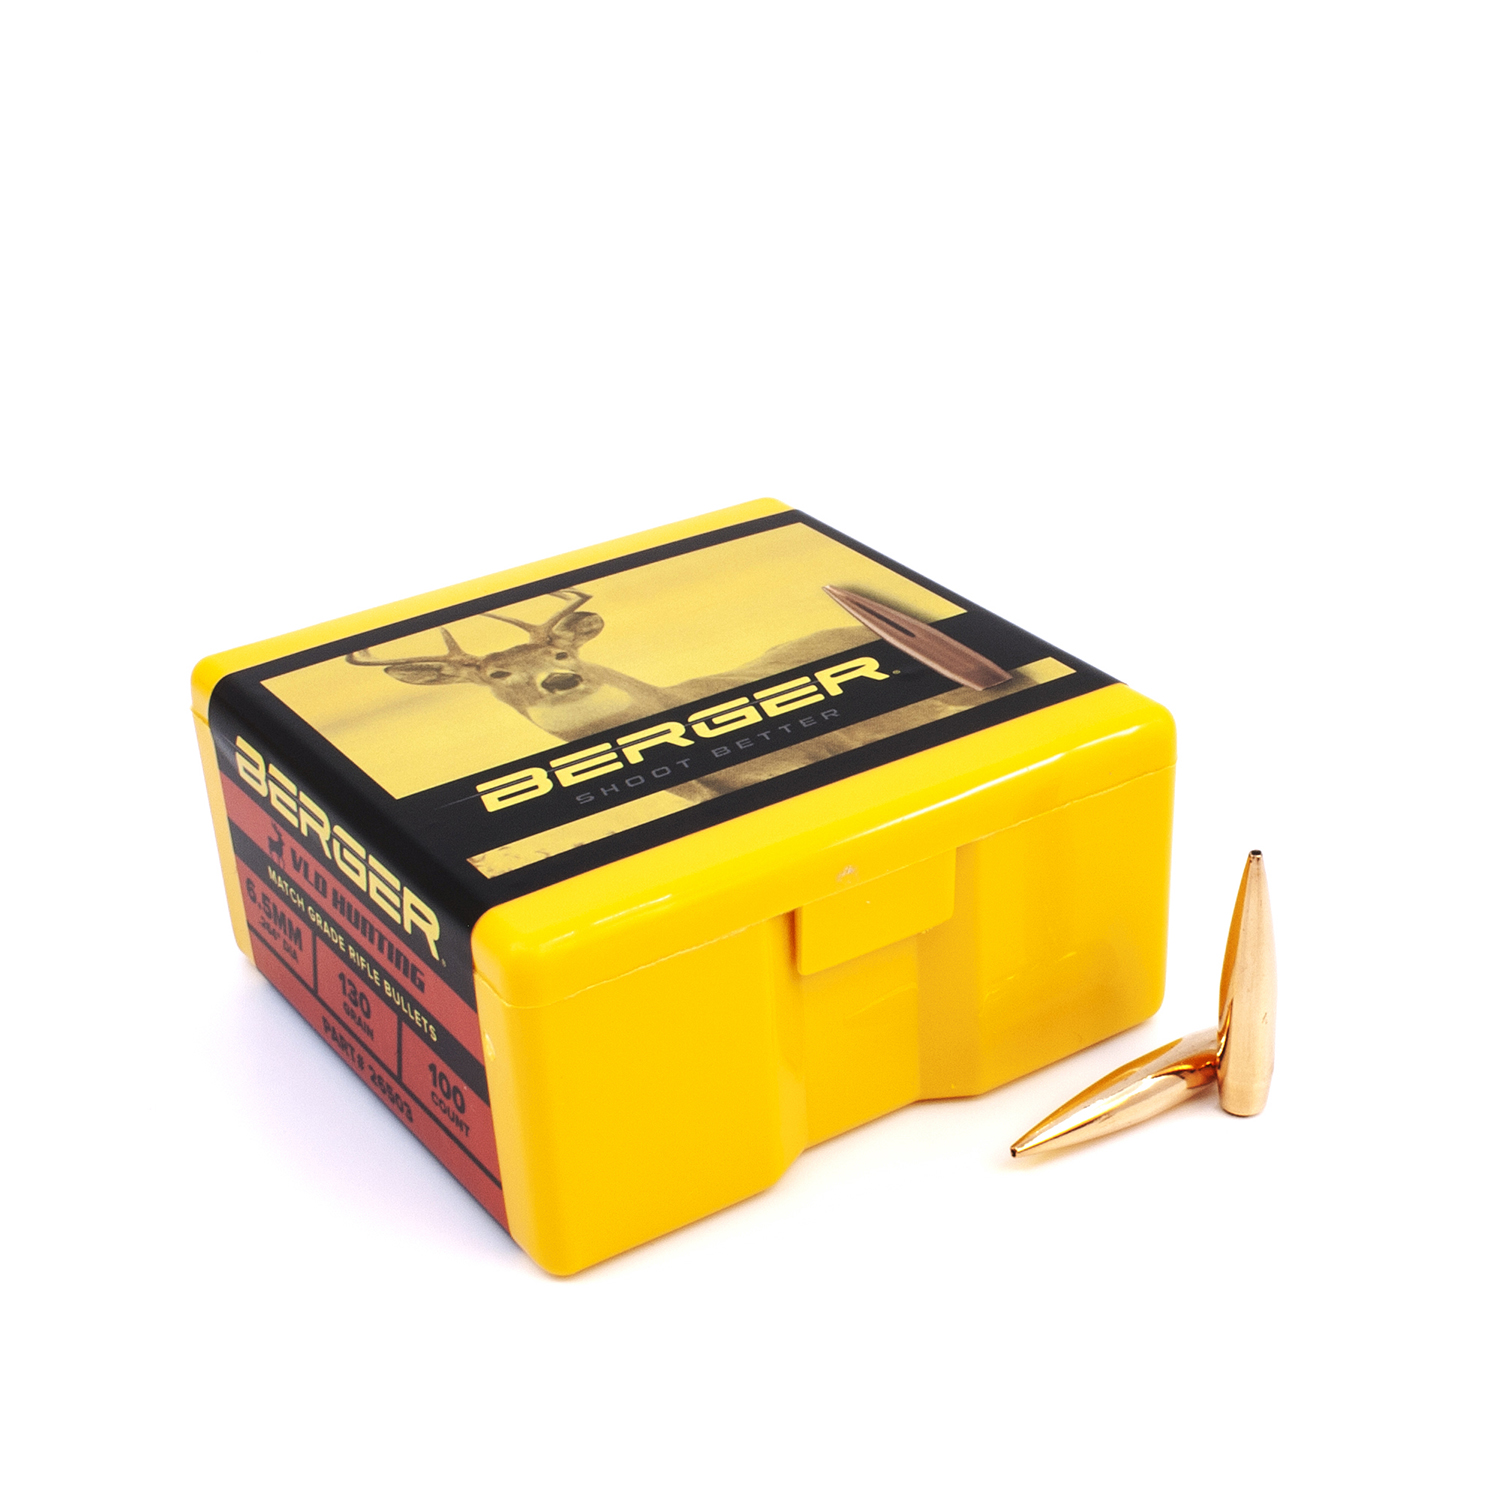 Berger Bullets - 6.5mm 130gr VLD Hunting - Box of 100 - Click Image to Close